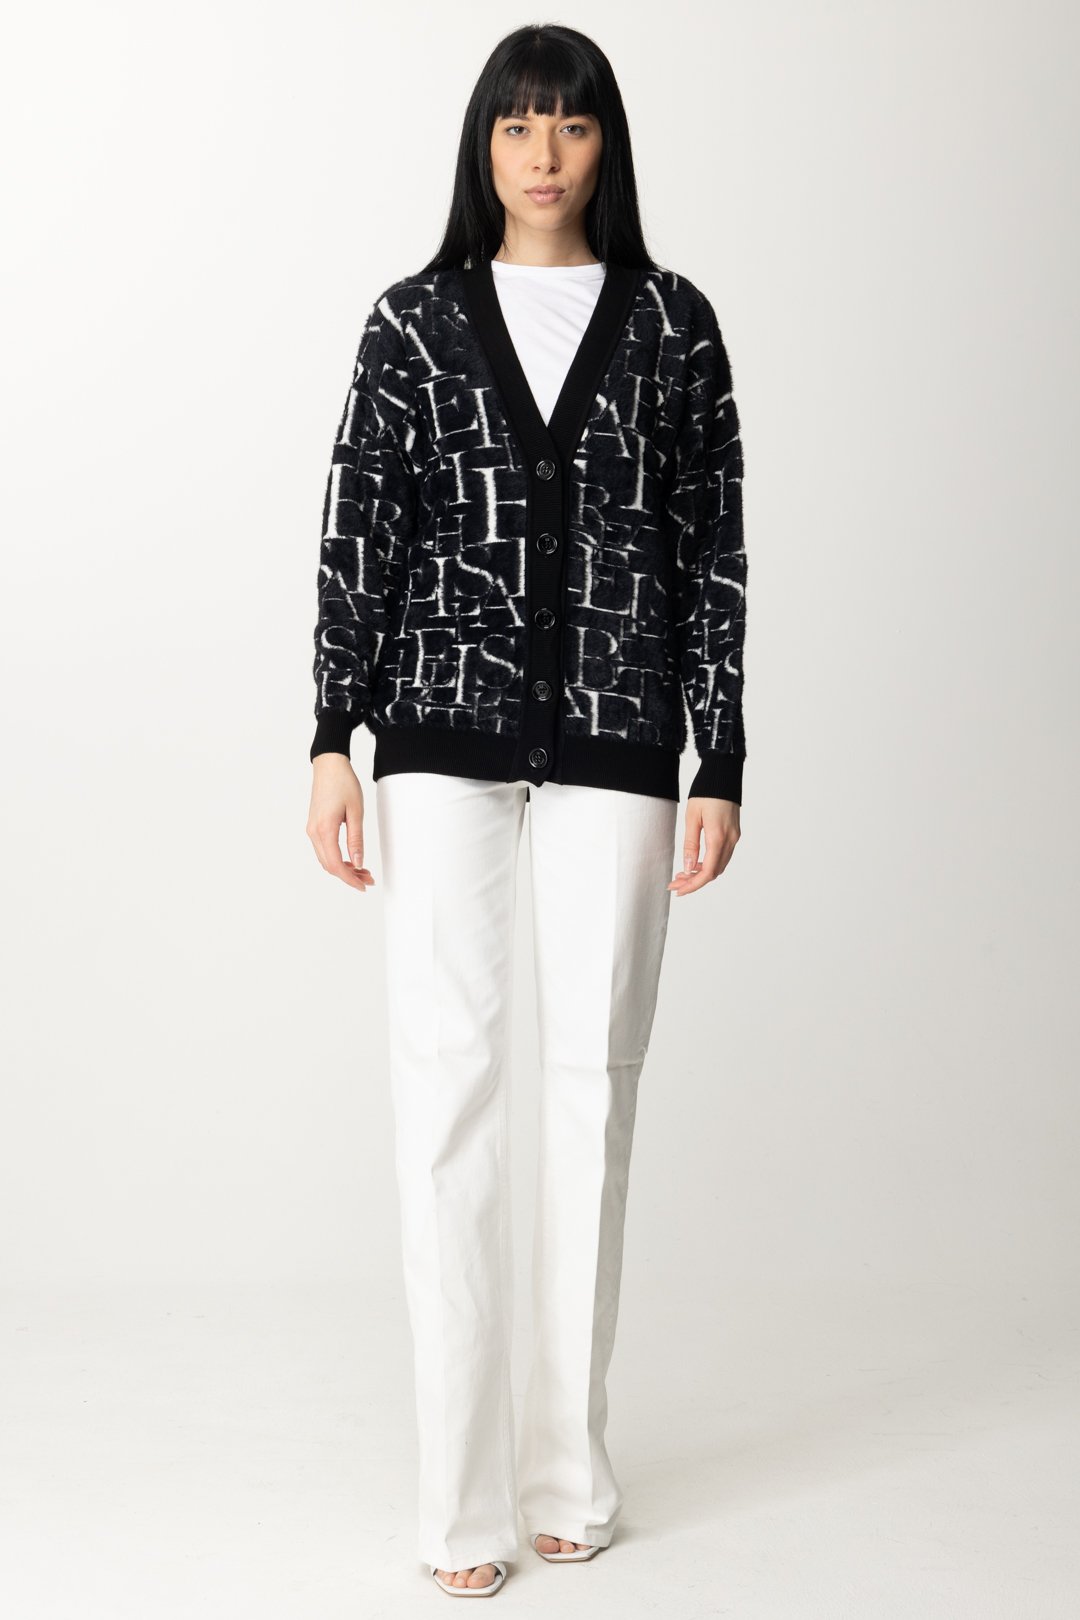 Preview: Elisabetta Franchi Oversized knit cardigan with lettering print Nero/Burro